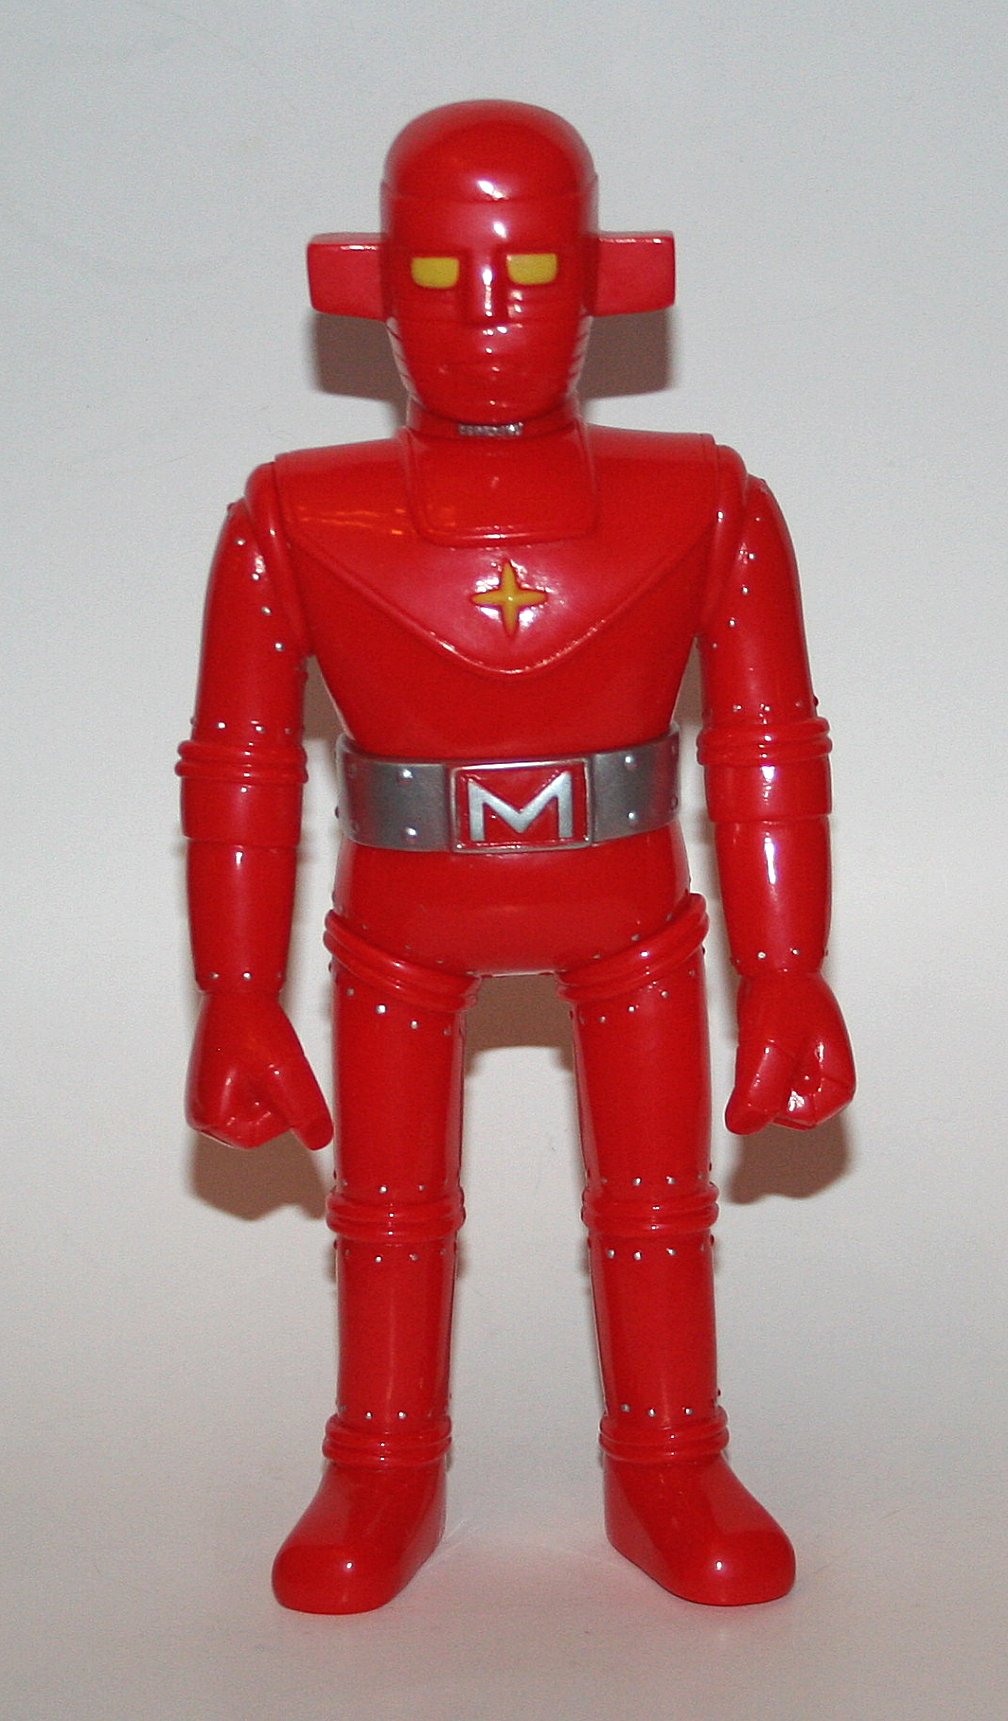 Awesome Toy Red Super Robot Fake Baron - Loose